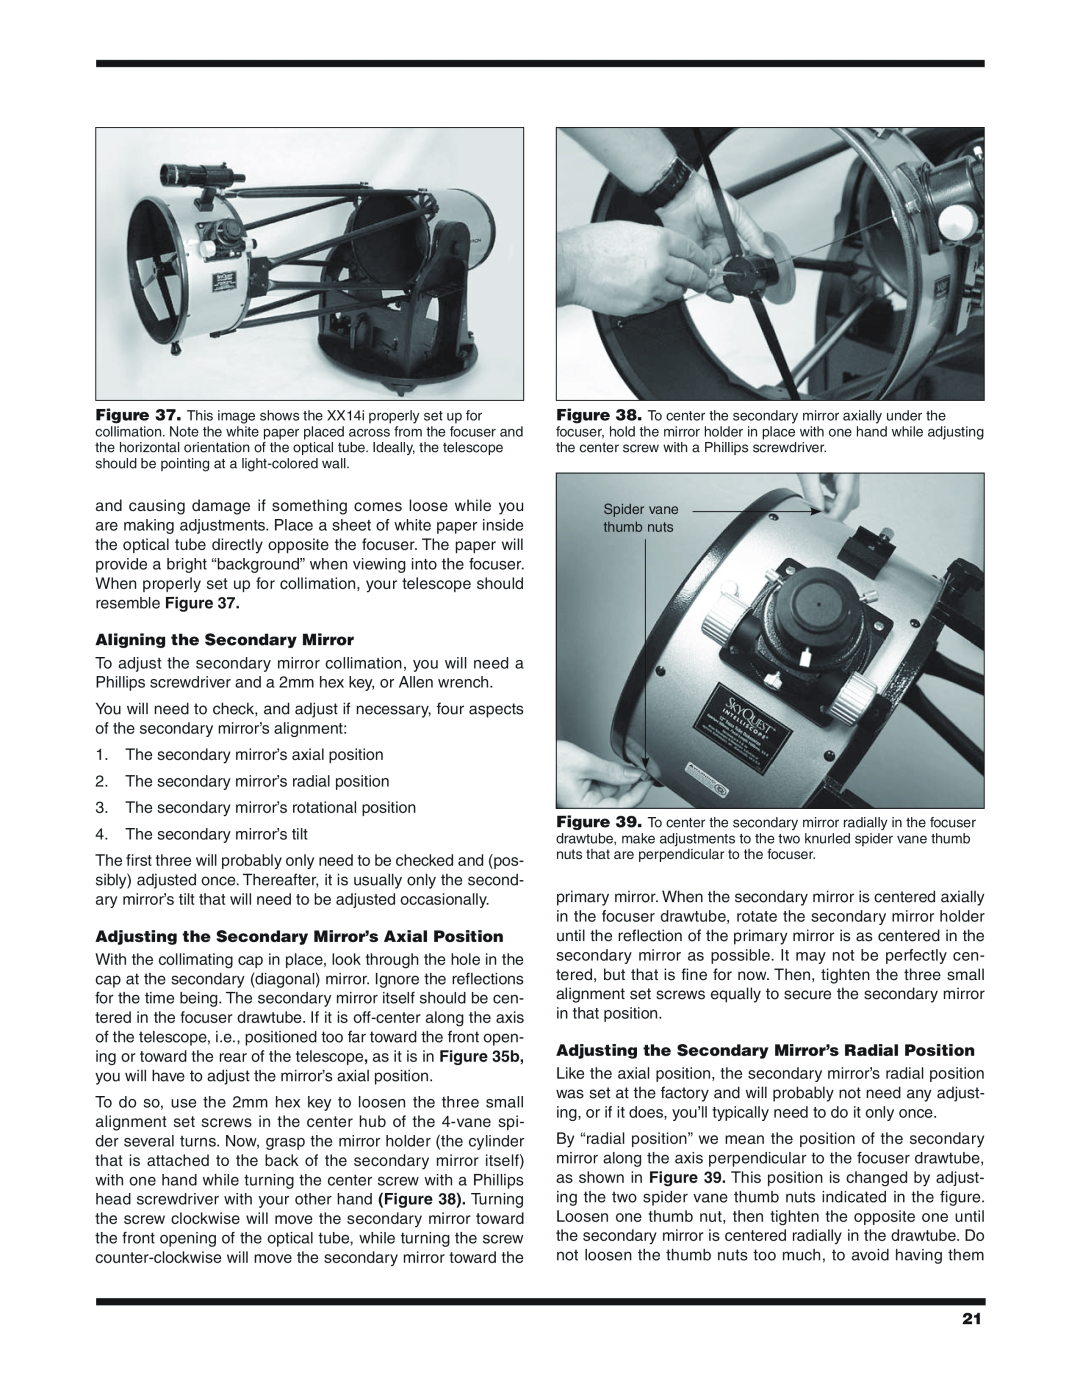 Orion 9791 instruction manual Aligning the Secondary Mirror, Adjusting the Secondary Mirror’s Axial Position 